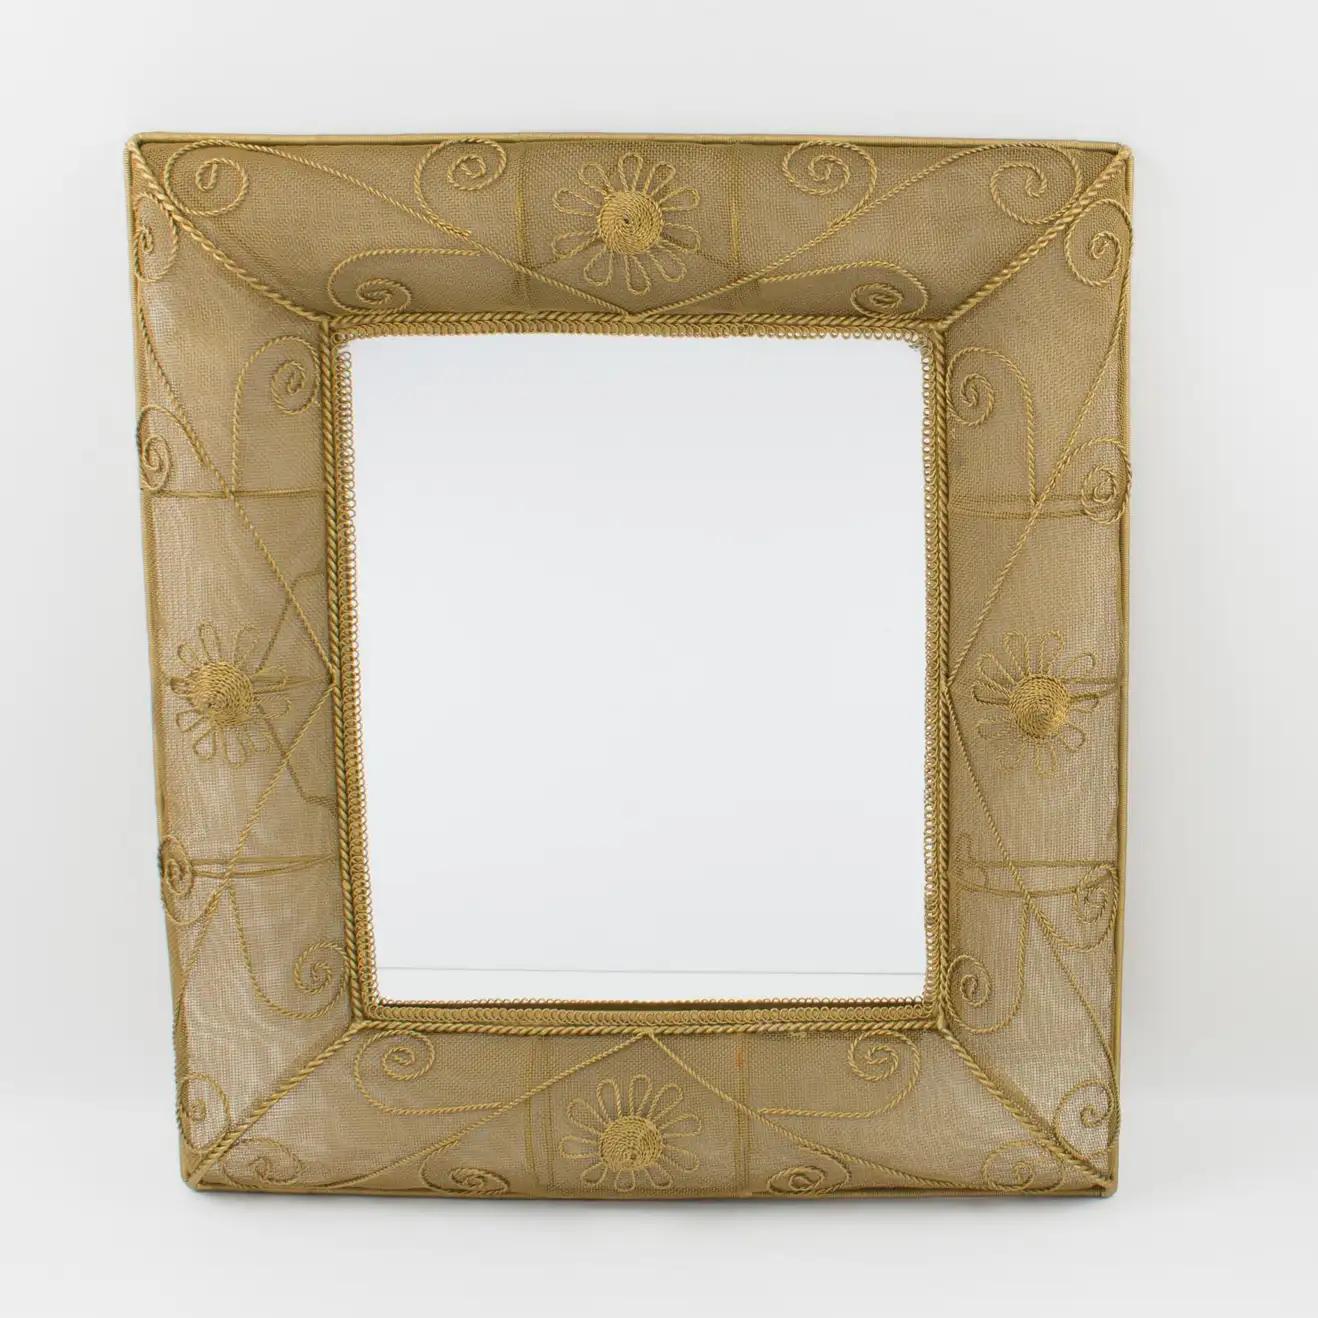 Gilt Metal Wire Mesh Wall Mirror with Floral Decor, 1950s For Sale 7